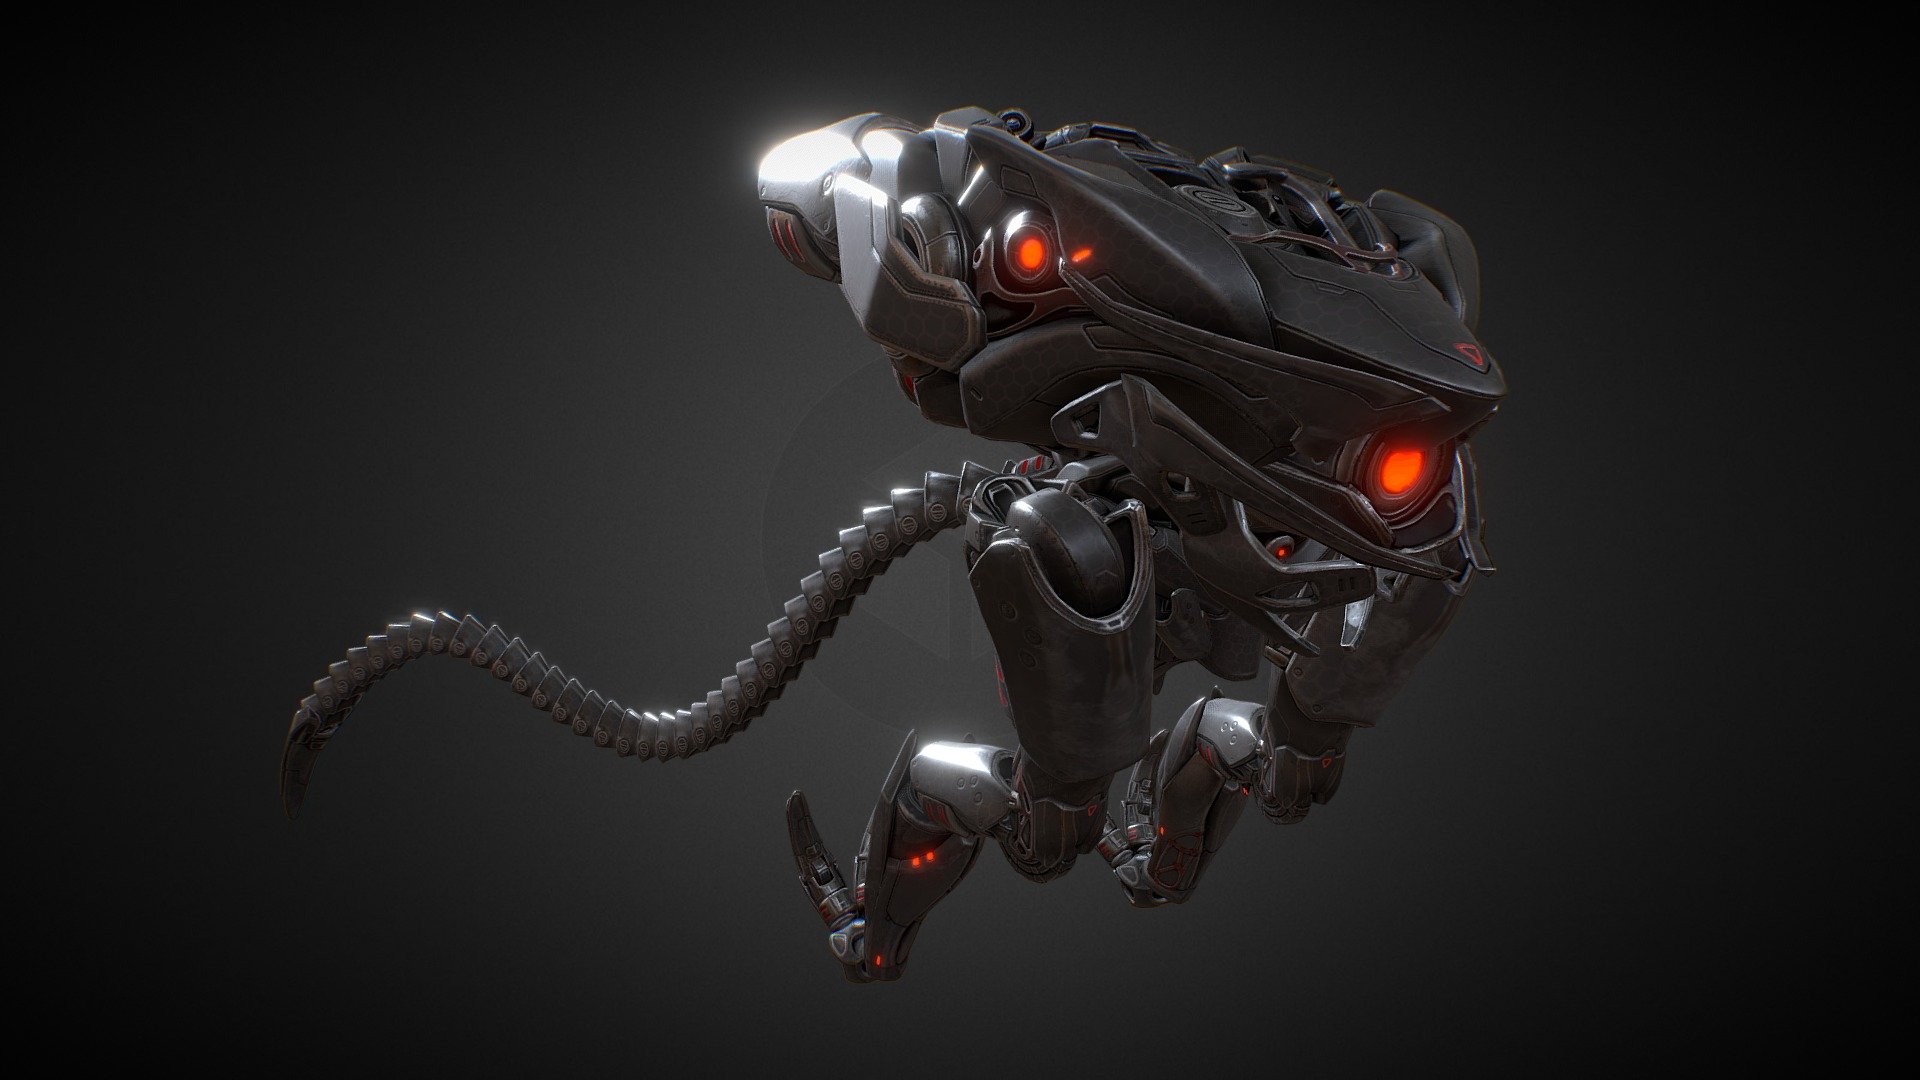 The Humnx Nautilus is an AI driven airborne hunter/killer drone, capable of eliminating targets hidden in tunnels with the use of tentacle like appendages.    This mech was created as a concept enemy for PVE, may be implemented in the future.

https://archangelgame.com/ - Humnx Nautilus - 3D model by Archangel: Hellfire (@archangelgame) 3d model